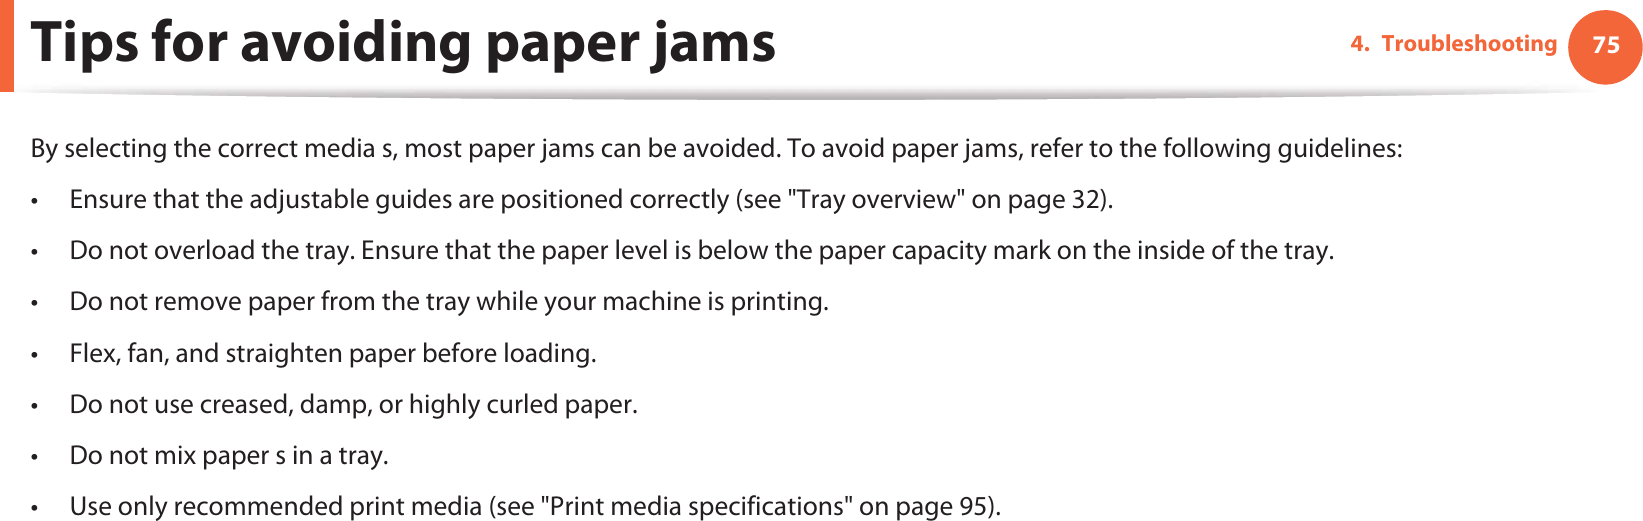 754. TroubleshootingTips for avoiding paper jamsBy selecting the correct media s, most paper jams can be avoided. To avoid paper jams, refer to the following guidelines:• Ensure that the adjustable guides are positioned correctly (see &quot;Tray overview&quot; on page 32).• Do not overload the tray. Ensure that the paper level is below the paper capacity mark on the inside of the tray.• Do not remove paper from the tray while your machine is printing.• Flex, fan, and straighten paper before loading. • Do not use creased, damp, or highly curled paper.• Do not mix paper s in a tray.• Use only recommended print media (see &quot;Print media specifications&quot; on page 95).